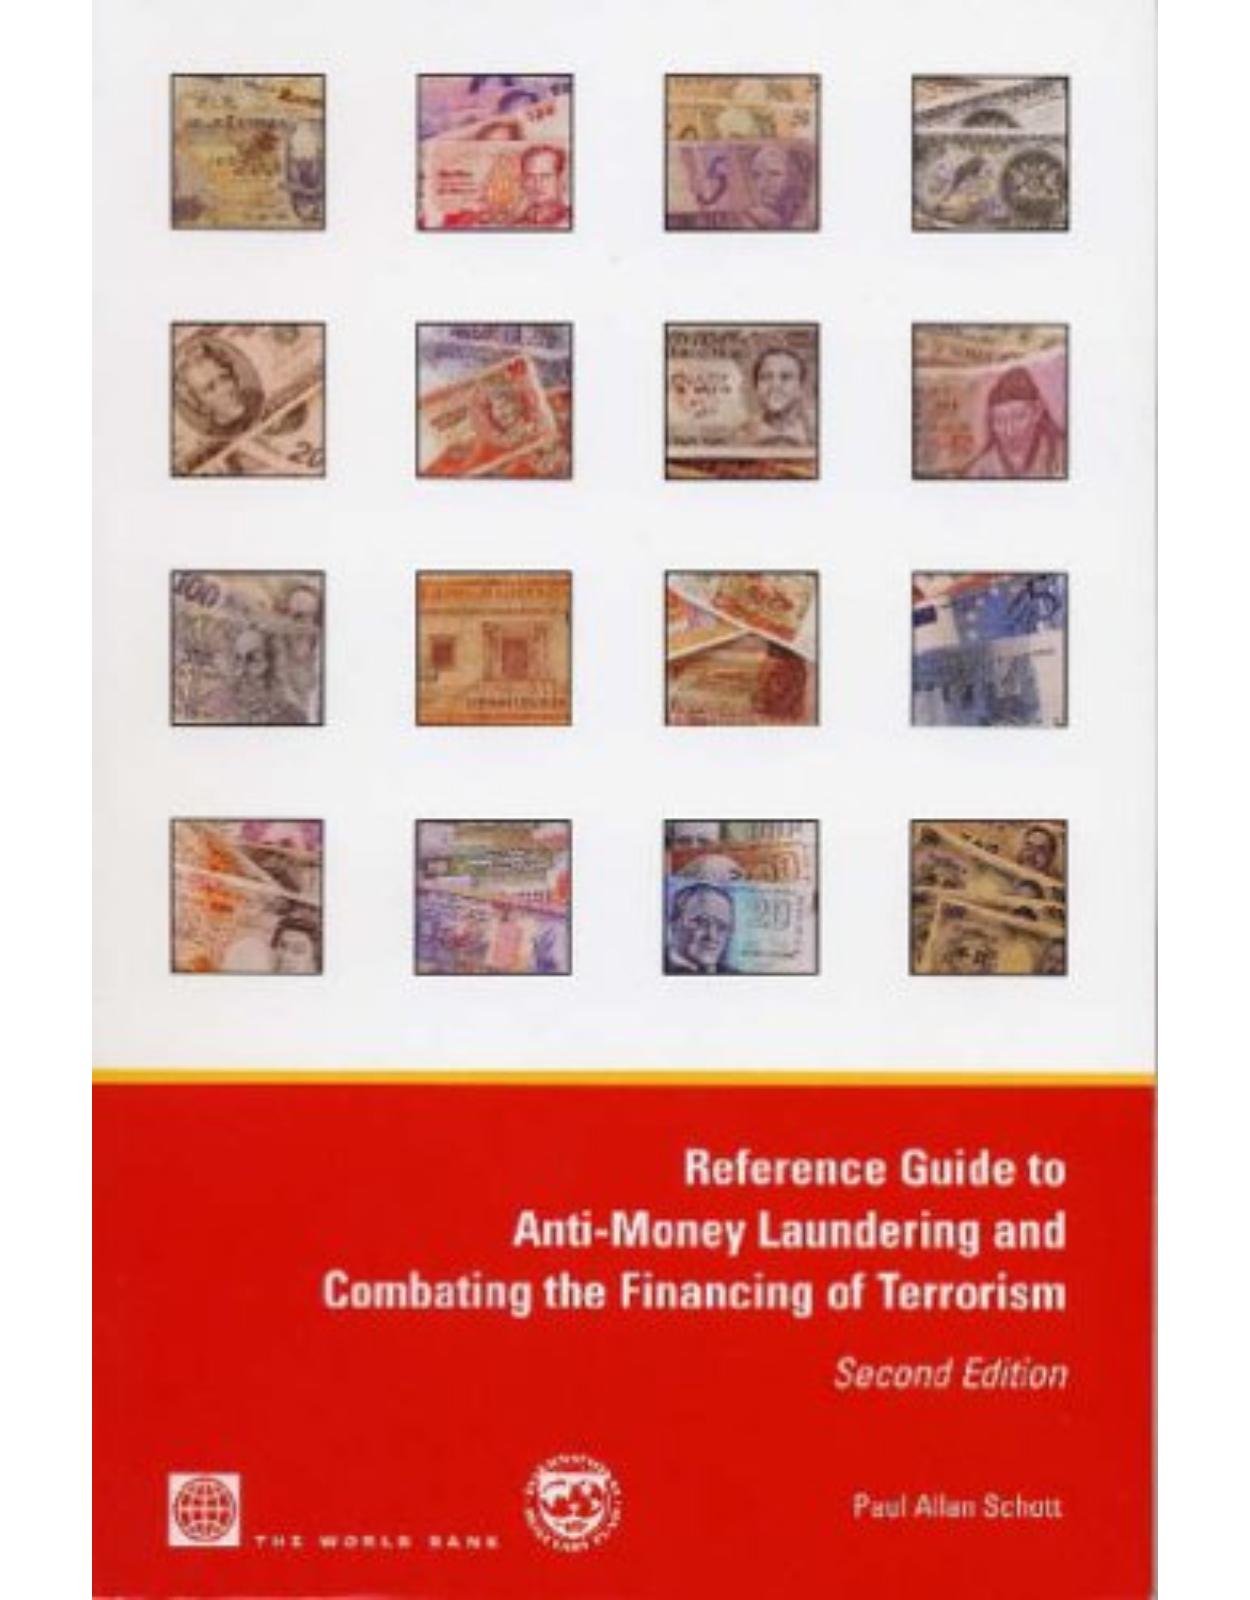 Reference Guide to Anti-Money Laundering and Combating the Financing of Terrorism 